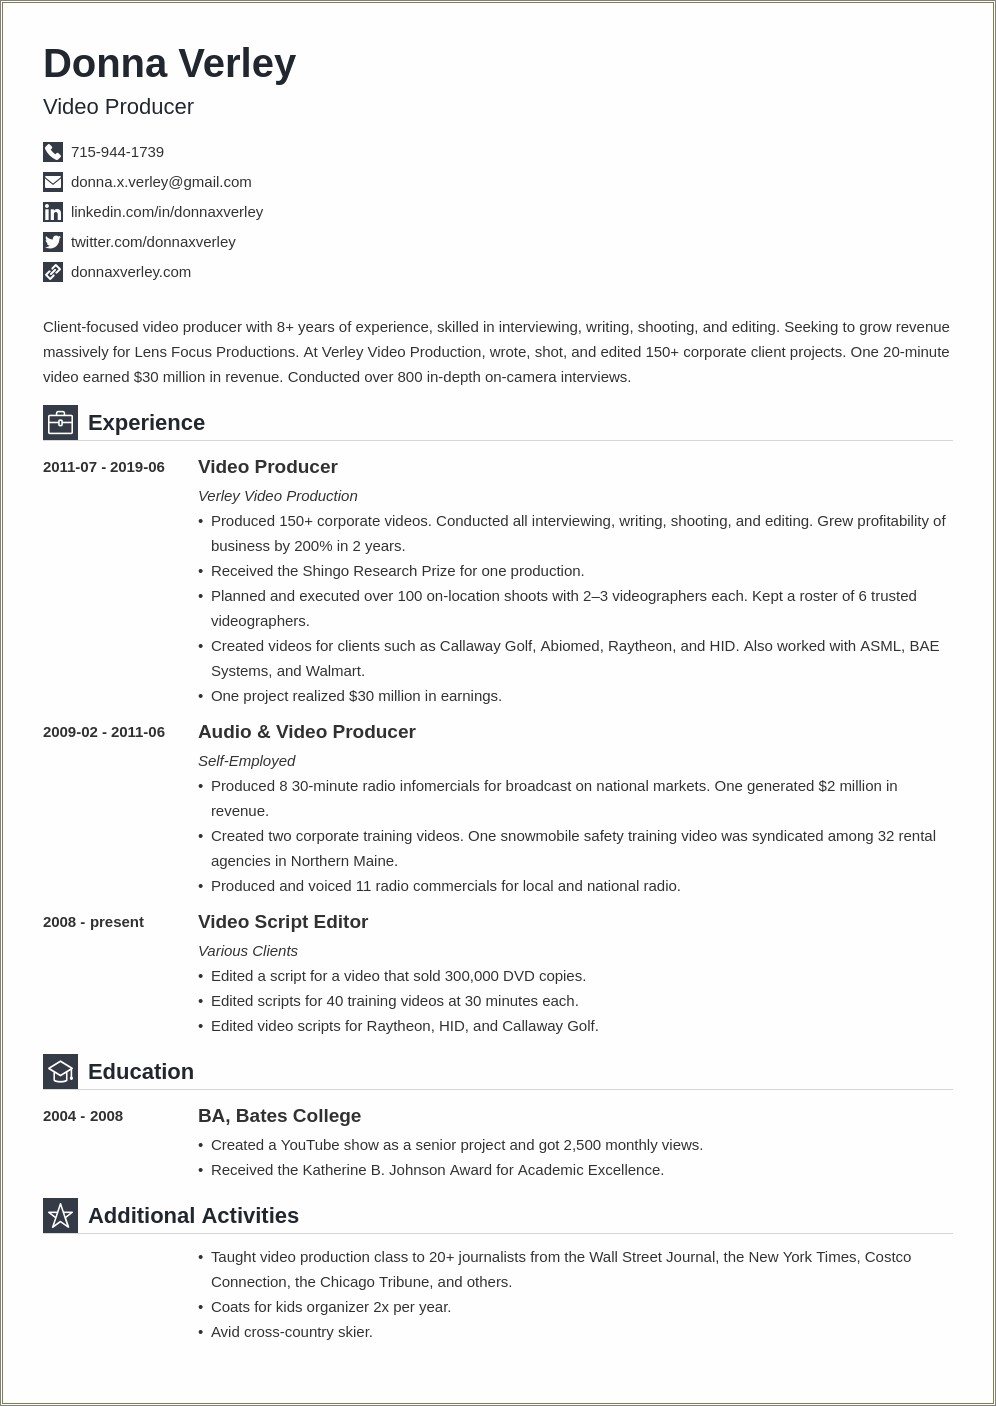 Ways To Show You Customer Experience On Resume